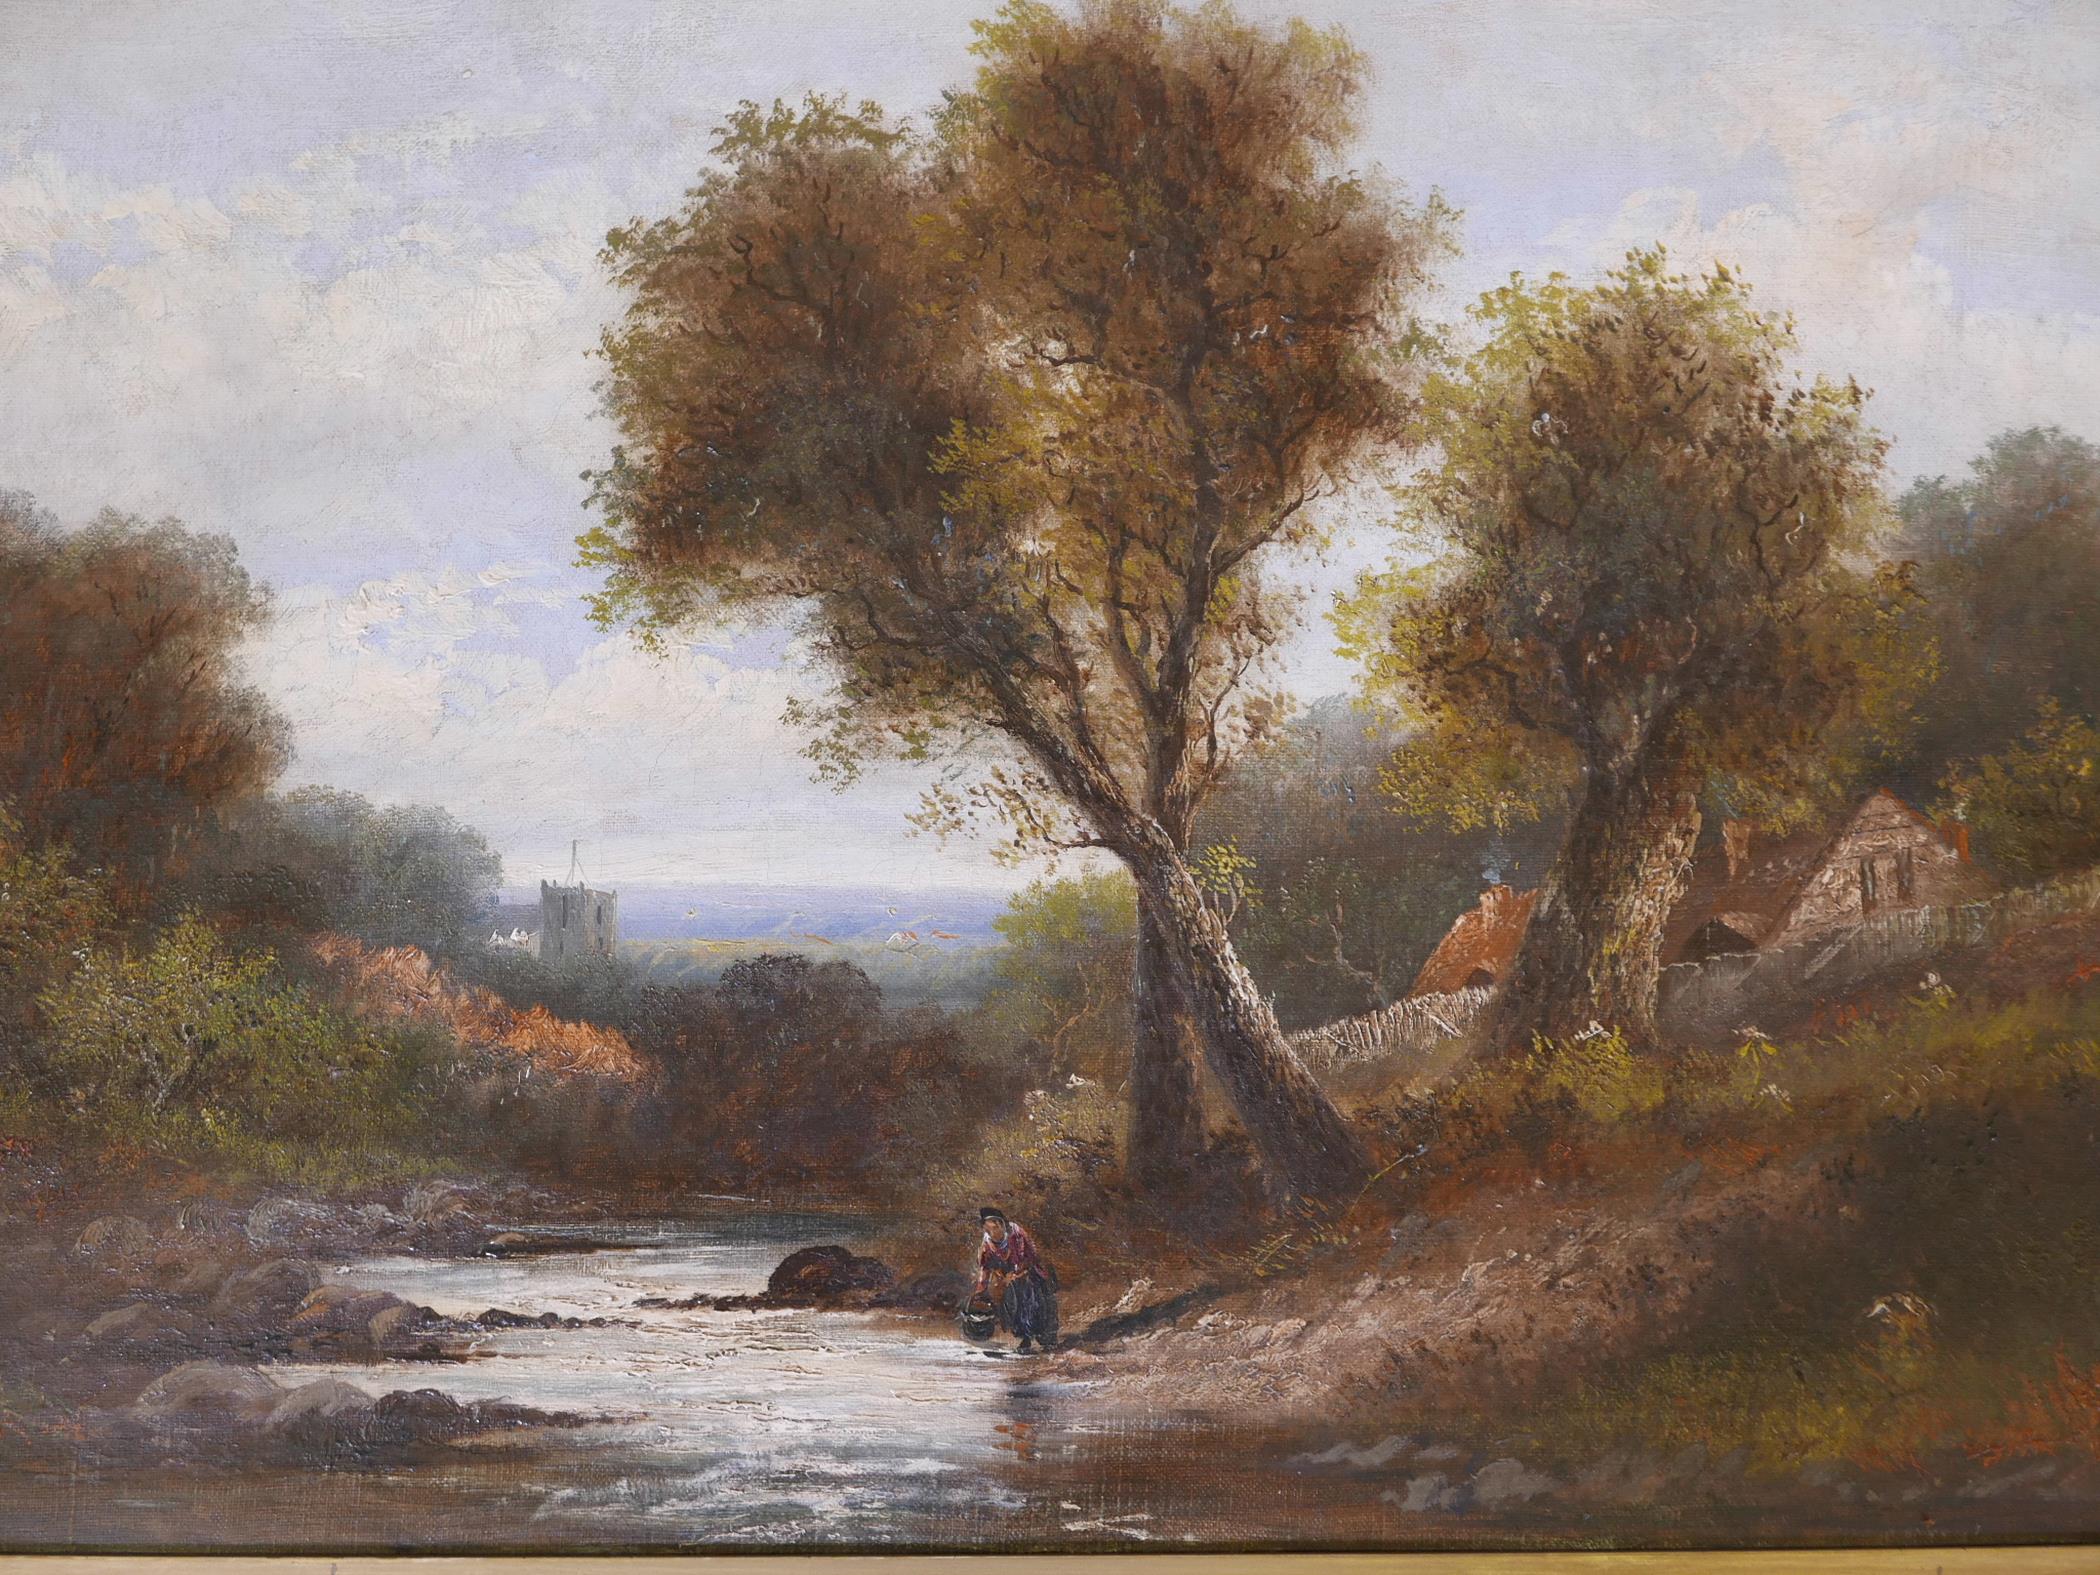 Attributed to E. Horton, landscape with woman by a stream, unsigned, 20" x 30"